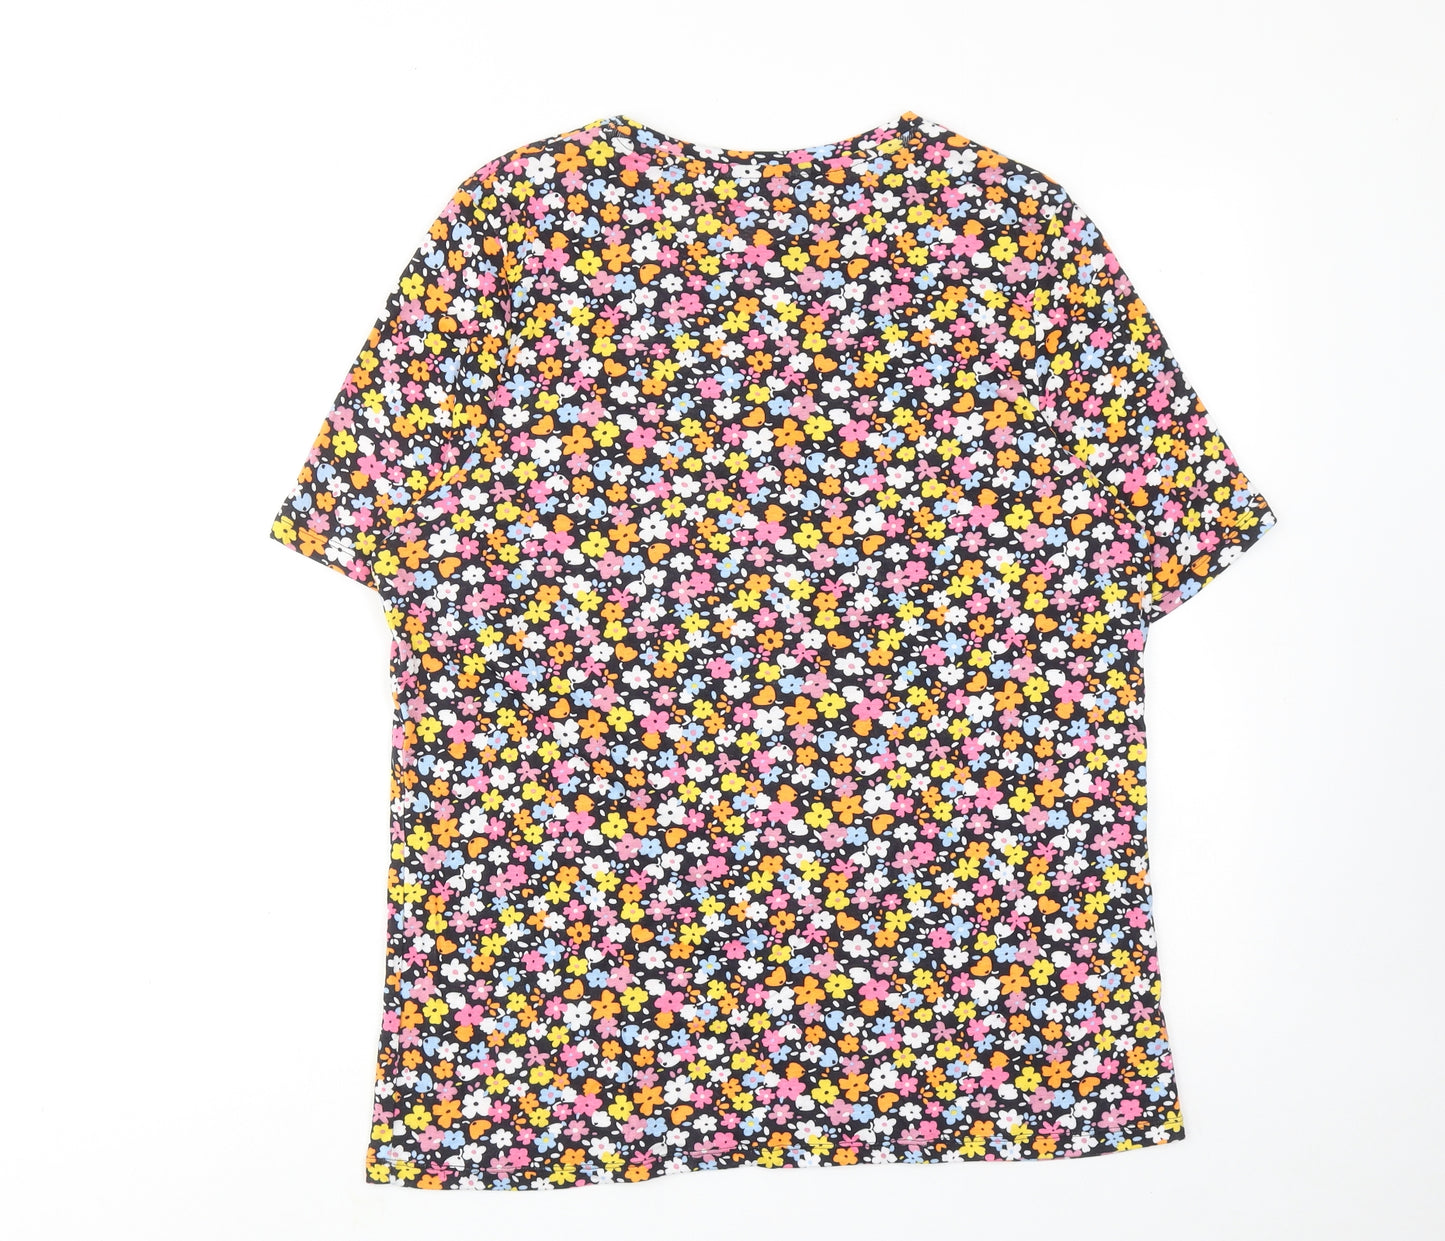 Marks and Spencer Womens Multicoloured Floral Cotton Basic T-Shirt Size 10 Round Neck